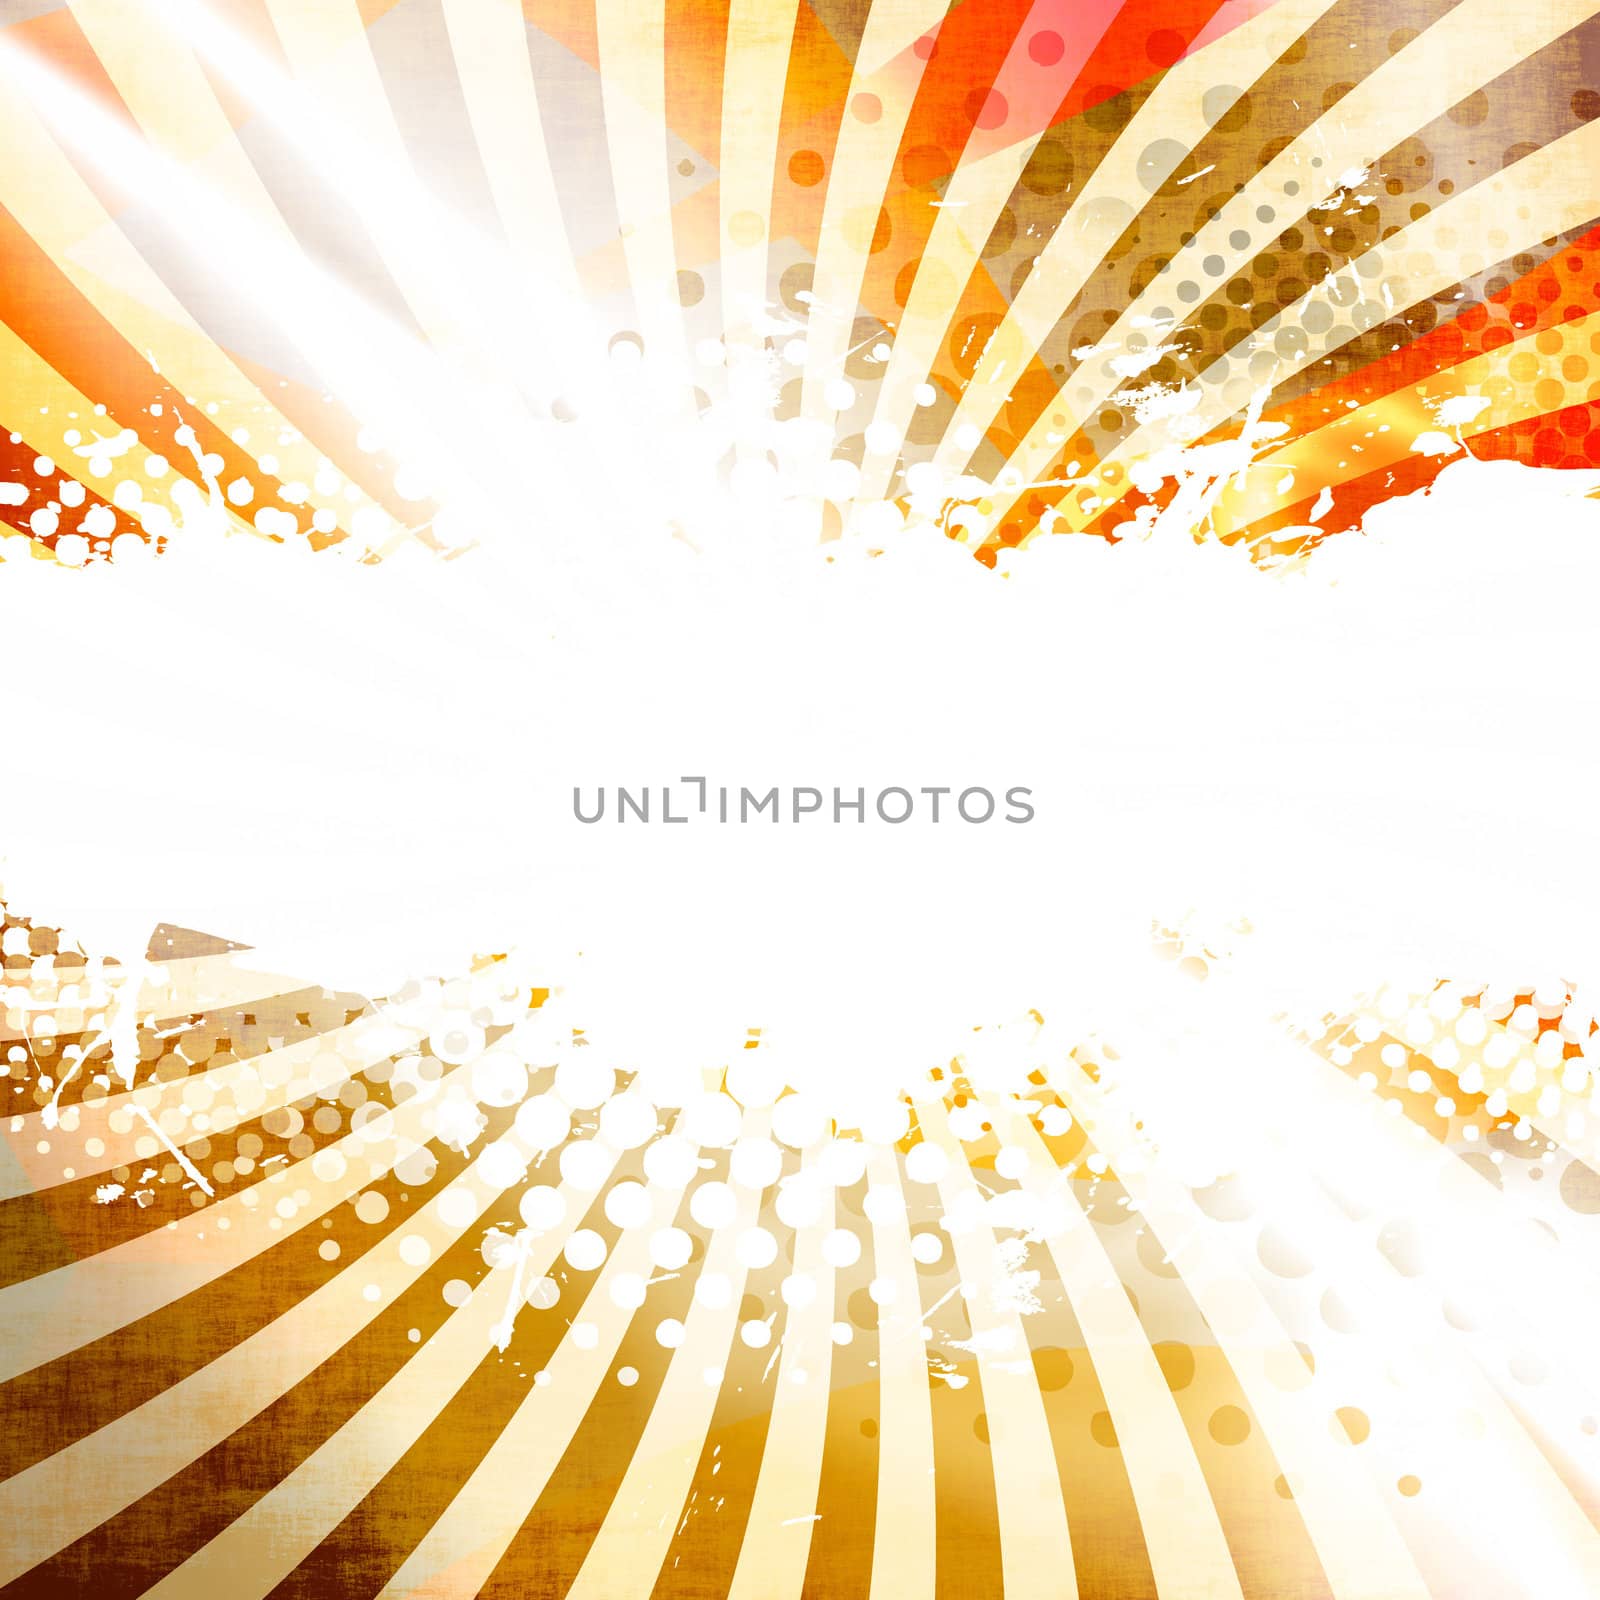 A golden abstract background layout with halftone dots and negative space.